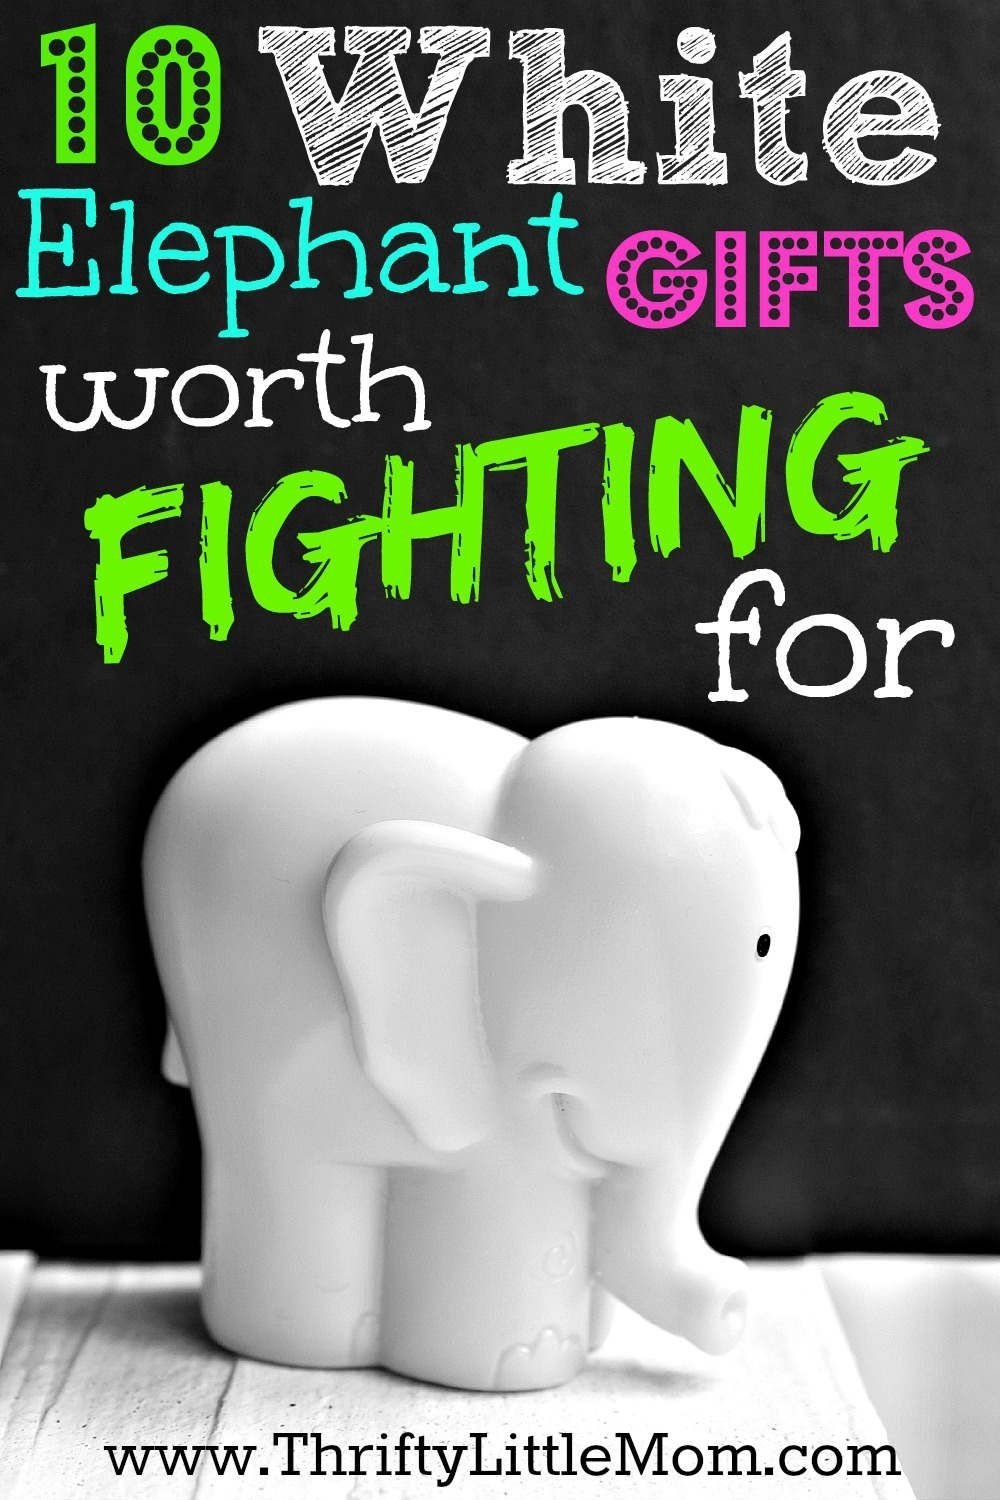 10 Lovely Best Yankee Swap Gift Ideas white elephant gifts worth fighting for yankee swap ideas white 15 2022